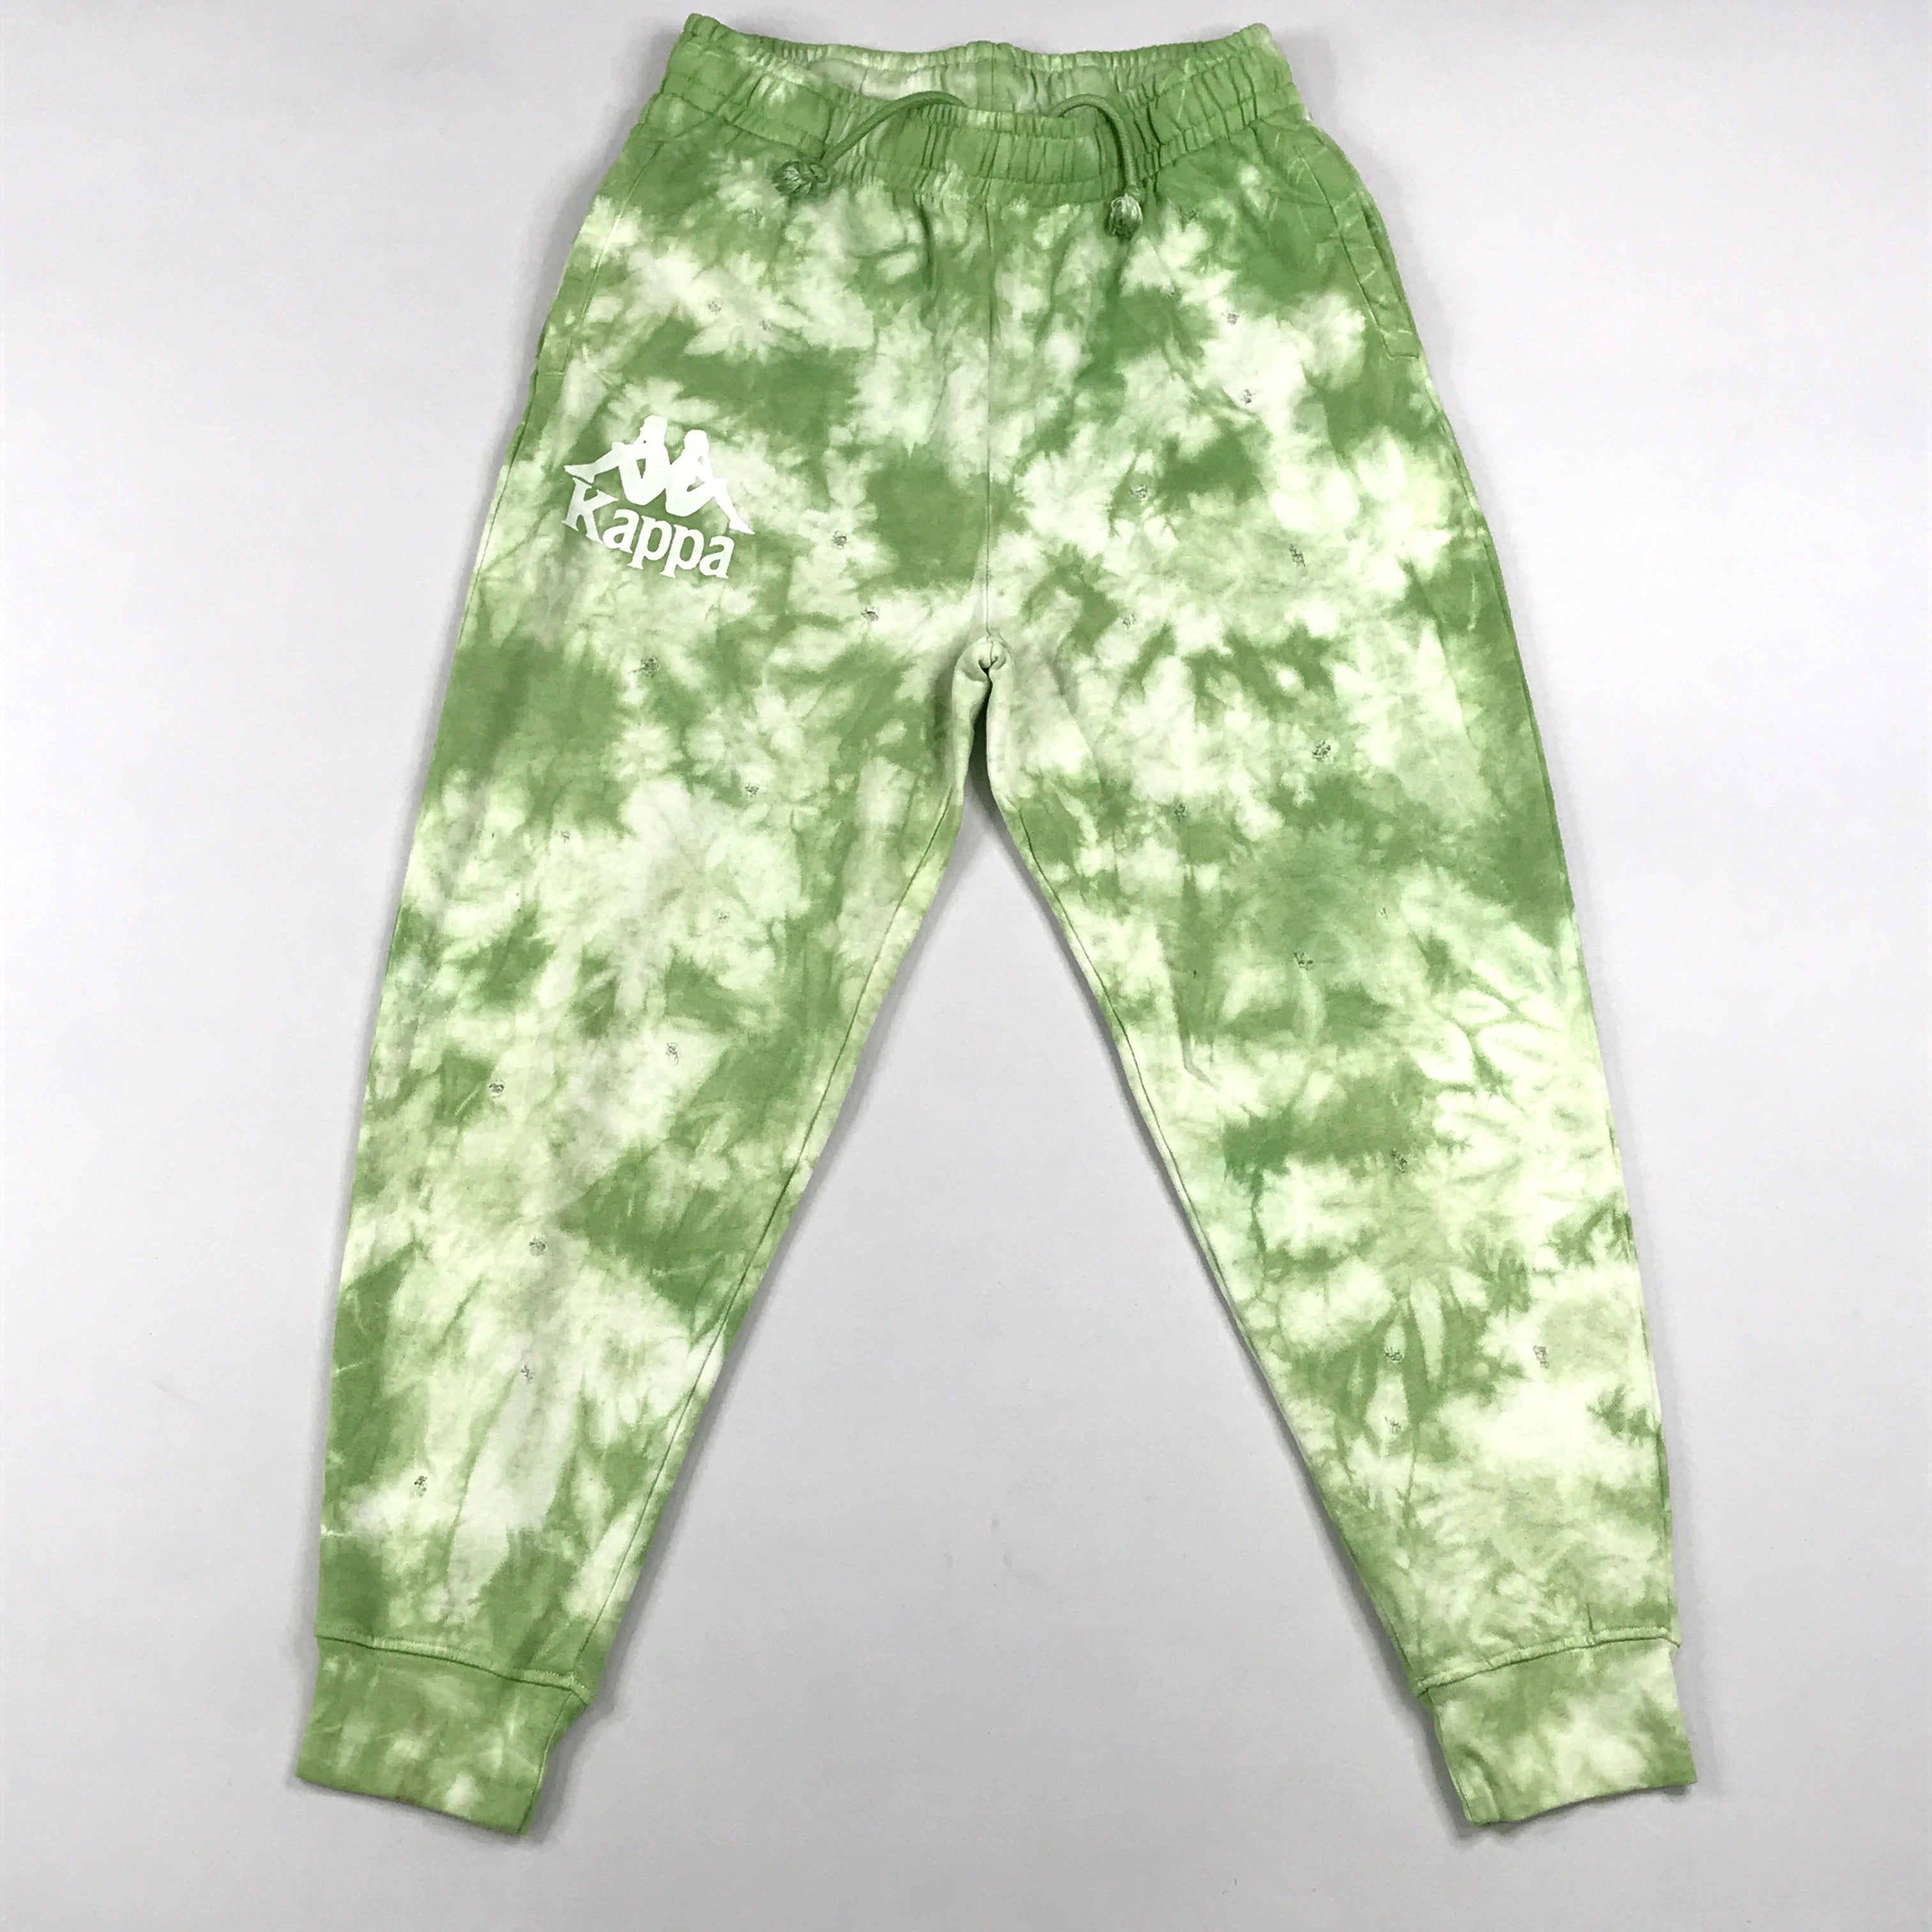 Kappa authentic cumbro joggers in green water, white